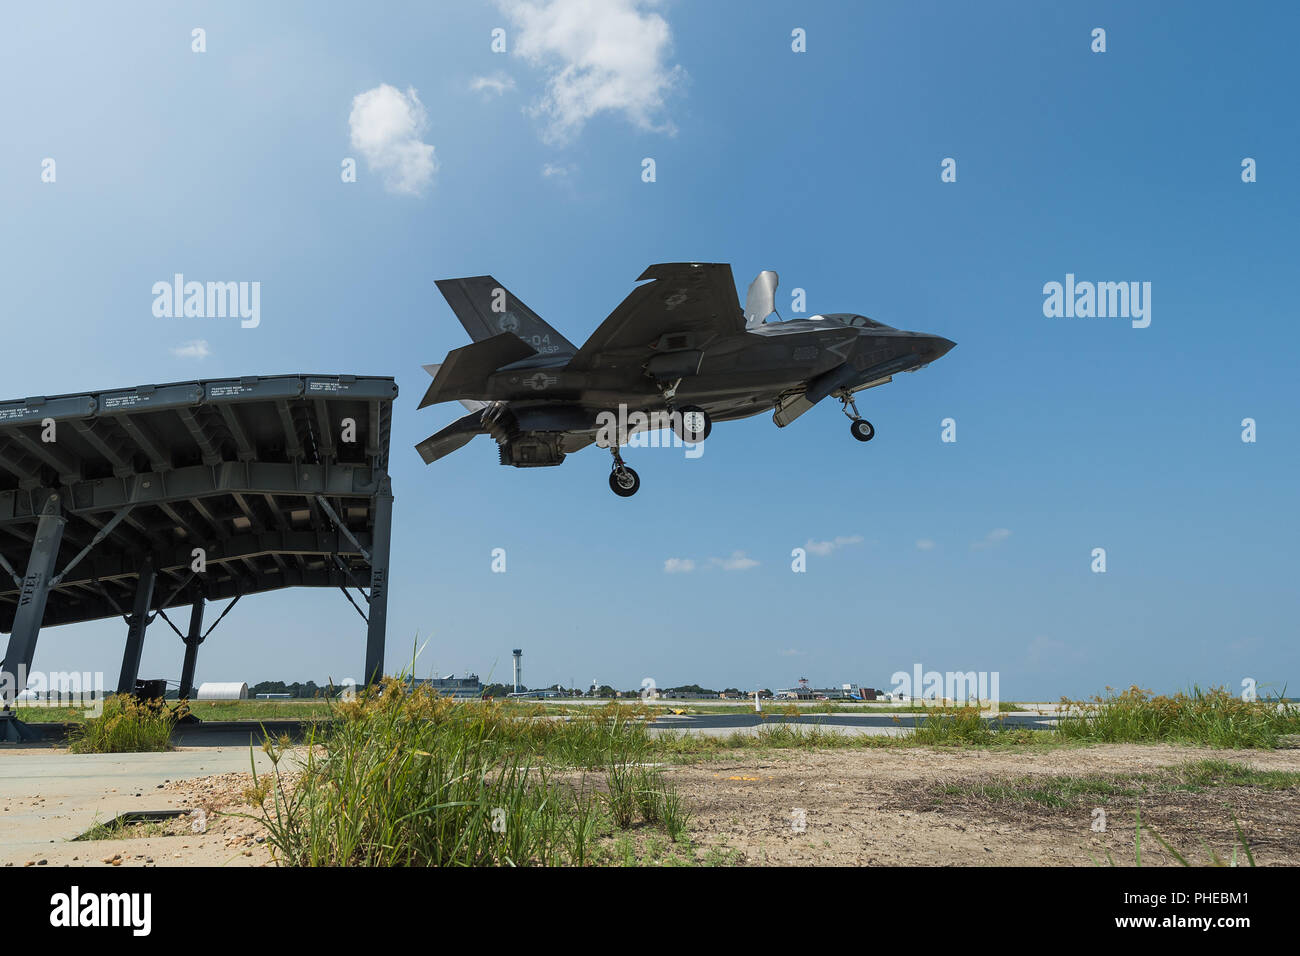 Royal Navy Cmdr. Nathan Gray and U.S. Marine Corps Maj. Michael Lippert, both F-35 Pax River ITF test pilots, conduct ski jumps and field carrier landing practices with F-35Bs on Aug. 28, 2018, at NAS Patuxent River as part of the workups for the First of Class Flight Trials aboard the HMS Queen Elizabeth.  Around 200 supporting staff from the ITF, including pilots, engineers, maintainers and data analysts, will take two F-35Bs test aircraft aboard HMS Queen Elizabeth this fall to evaluate the fifth-generation aircraft performance and integration with Royal Navy’s newest aircraft carrier. This Stock Photo